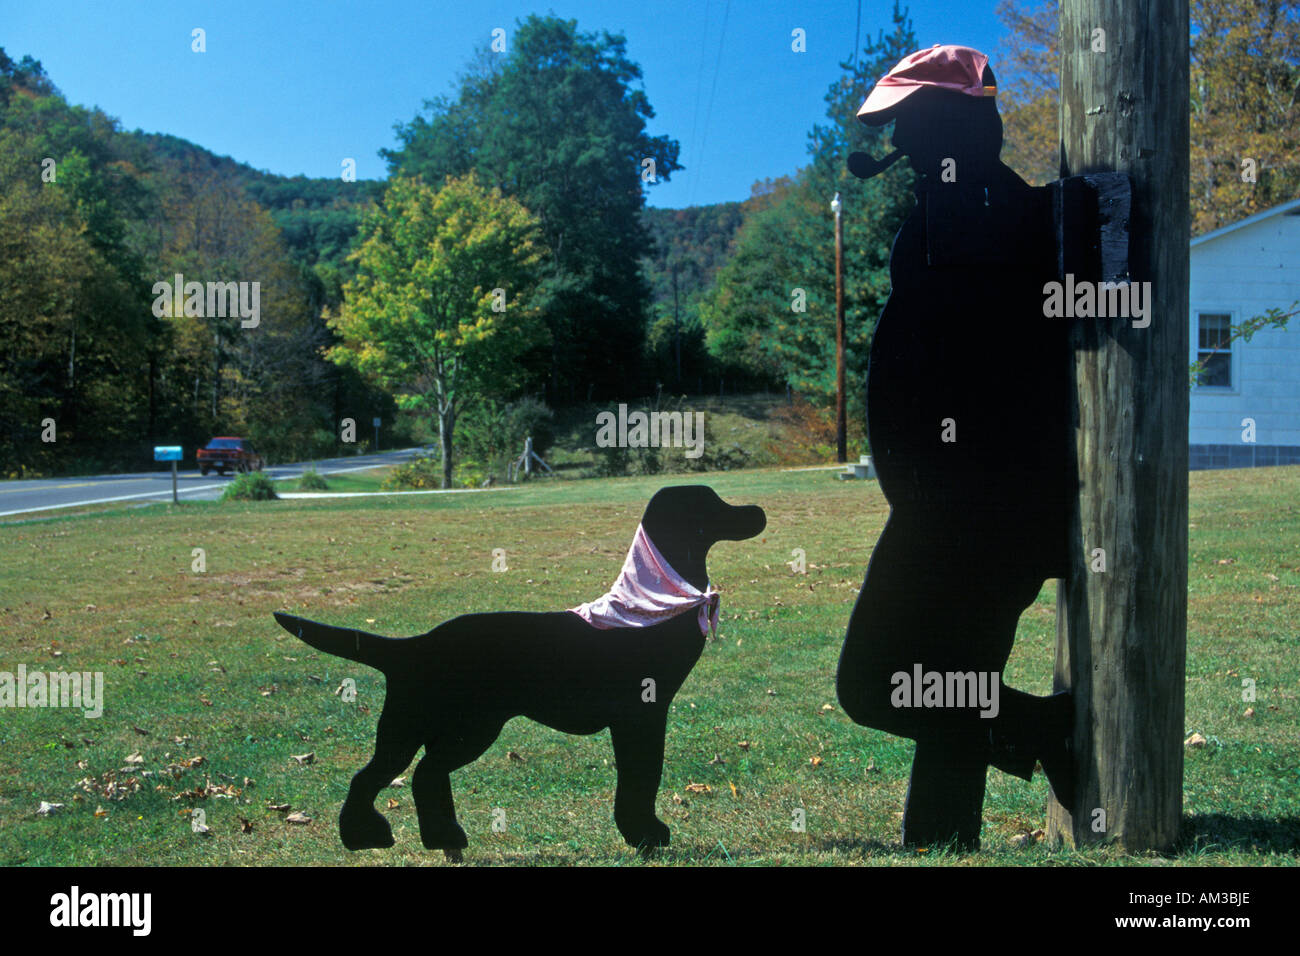 Black dog and man smoking pipe wooden cutouts by roadside Route 39 WV Stock Photo